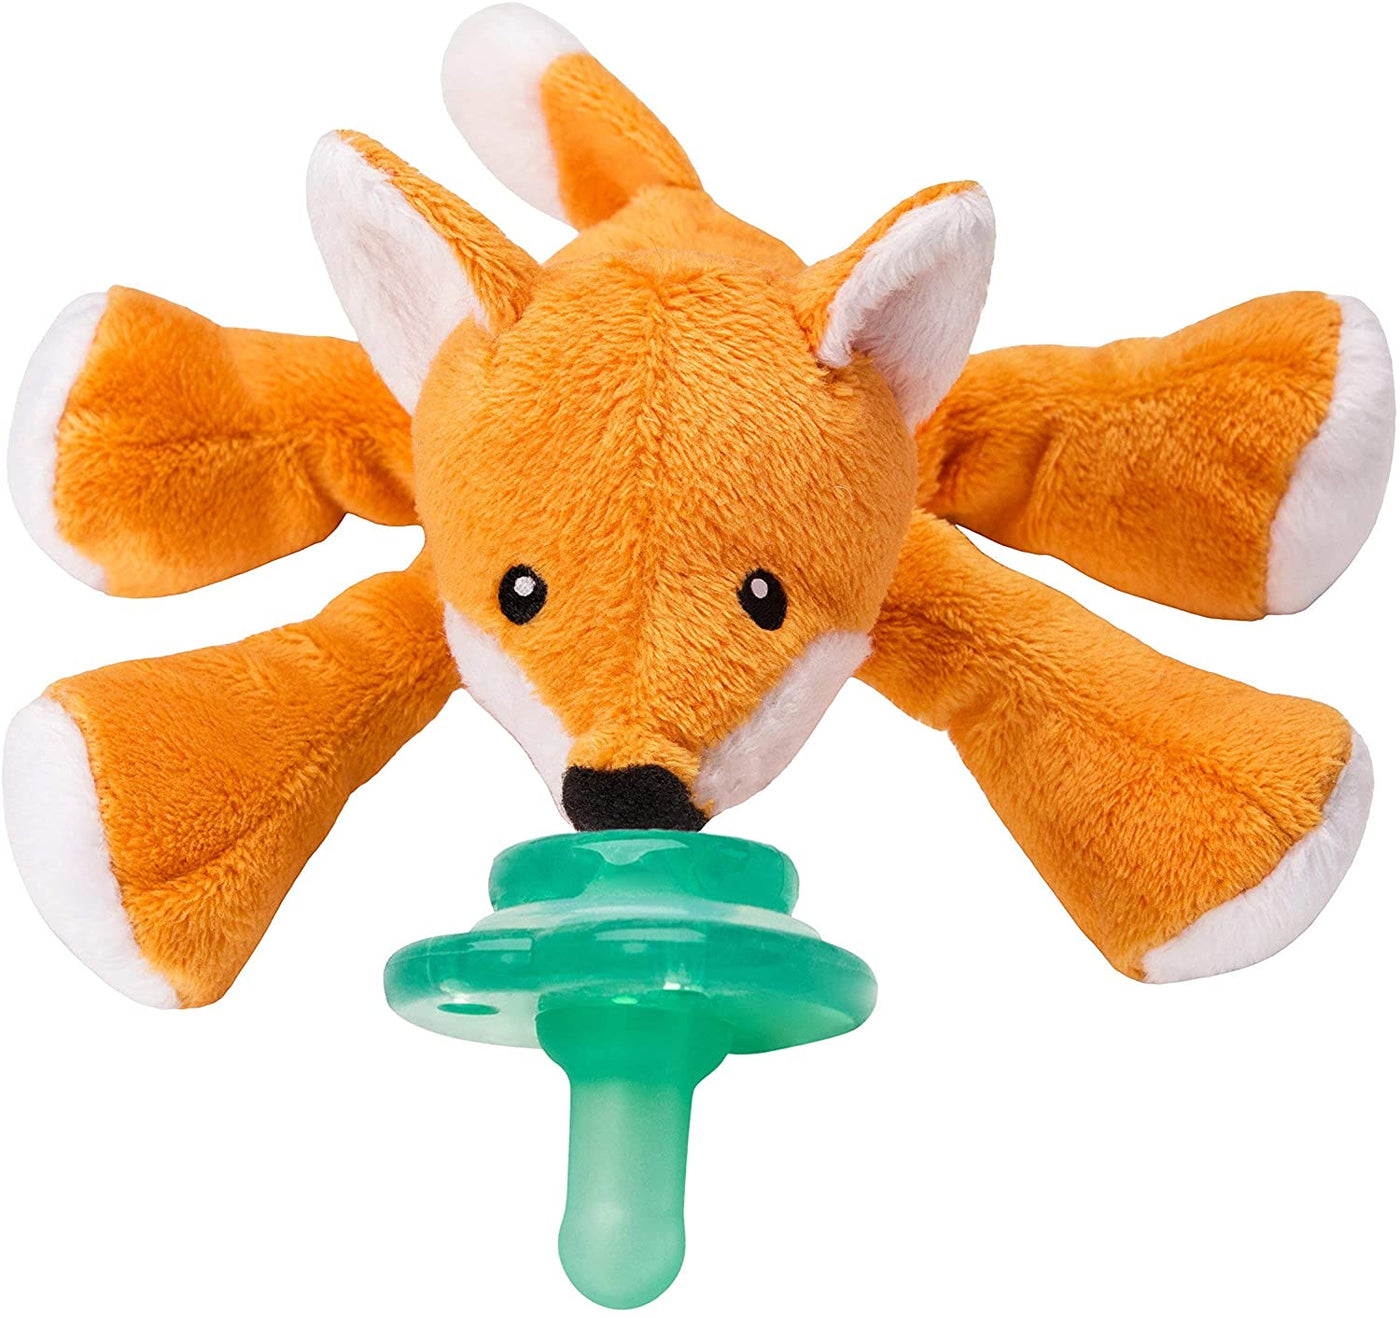 Nookums Paci-Plushies Shakies - Fox Pacifier Holder - Plush Toy Includes Detachable Pacifier - Little Kooma